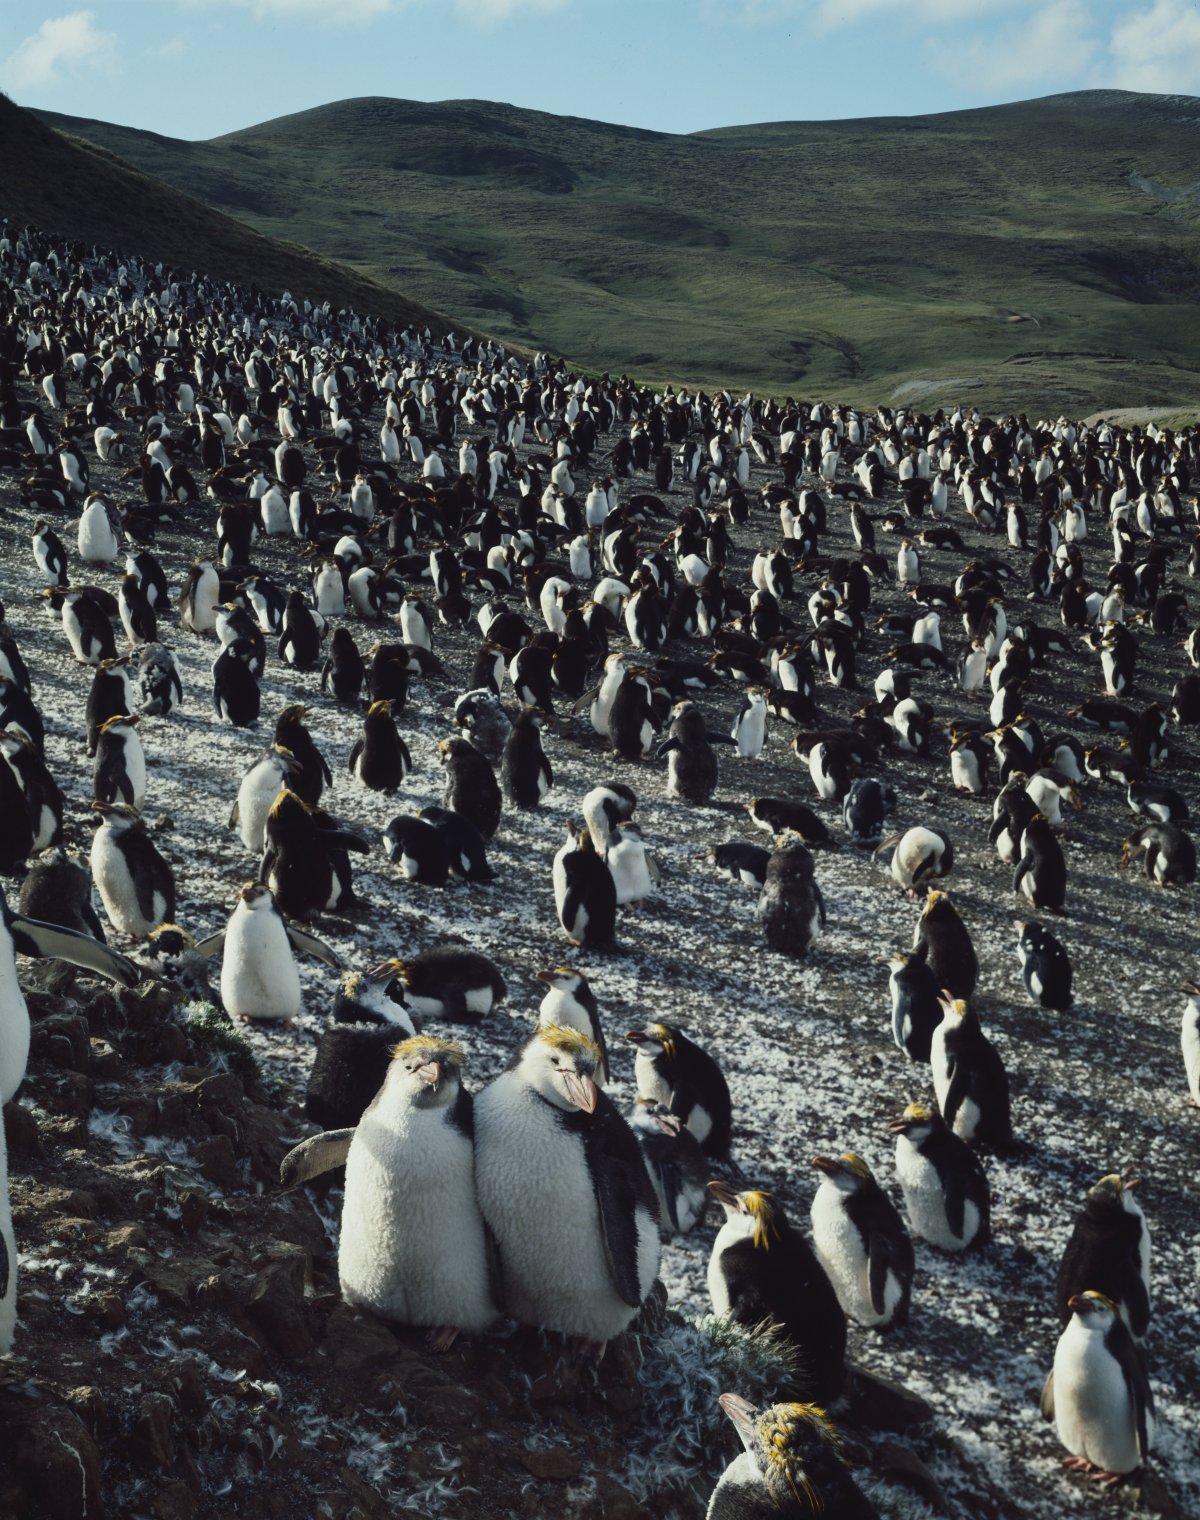 A mass of penguins scatter a pebbled cliff side. The penguins are small with yellow crests. Most are in pairs while some are single. In the background is a rolling green hillside and a blue sky.